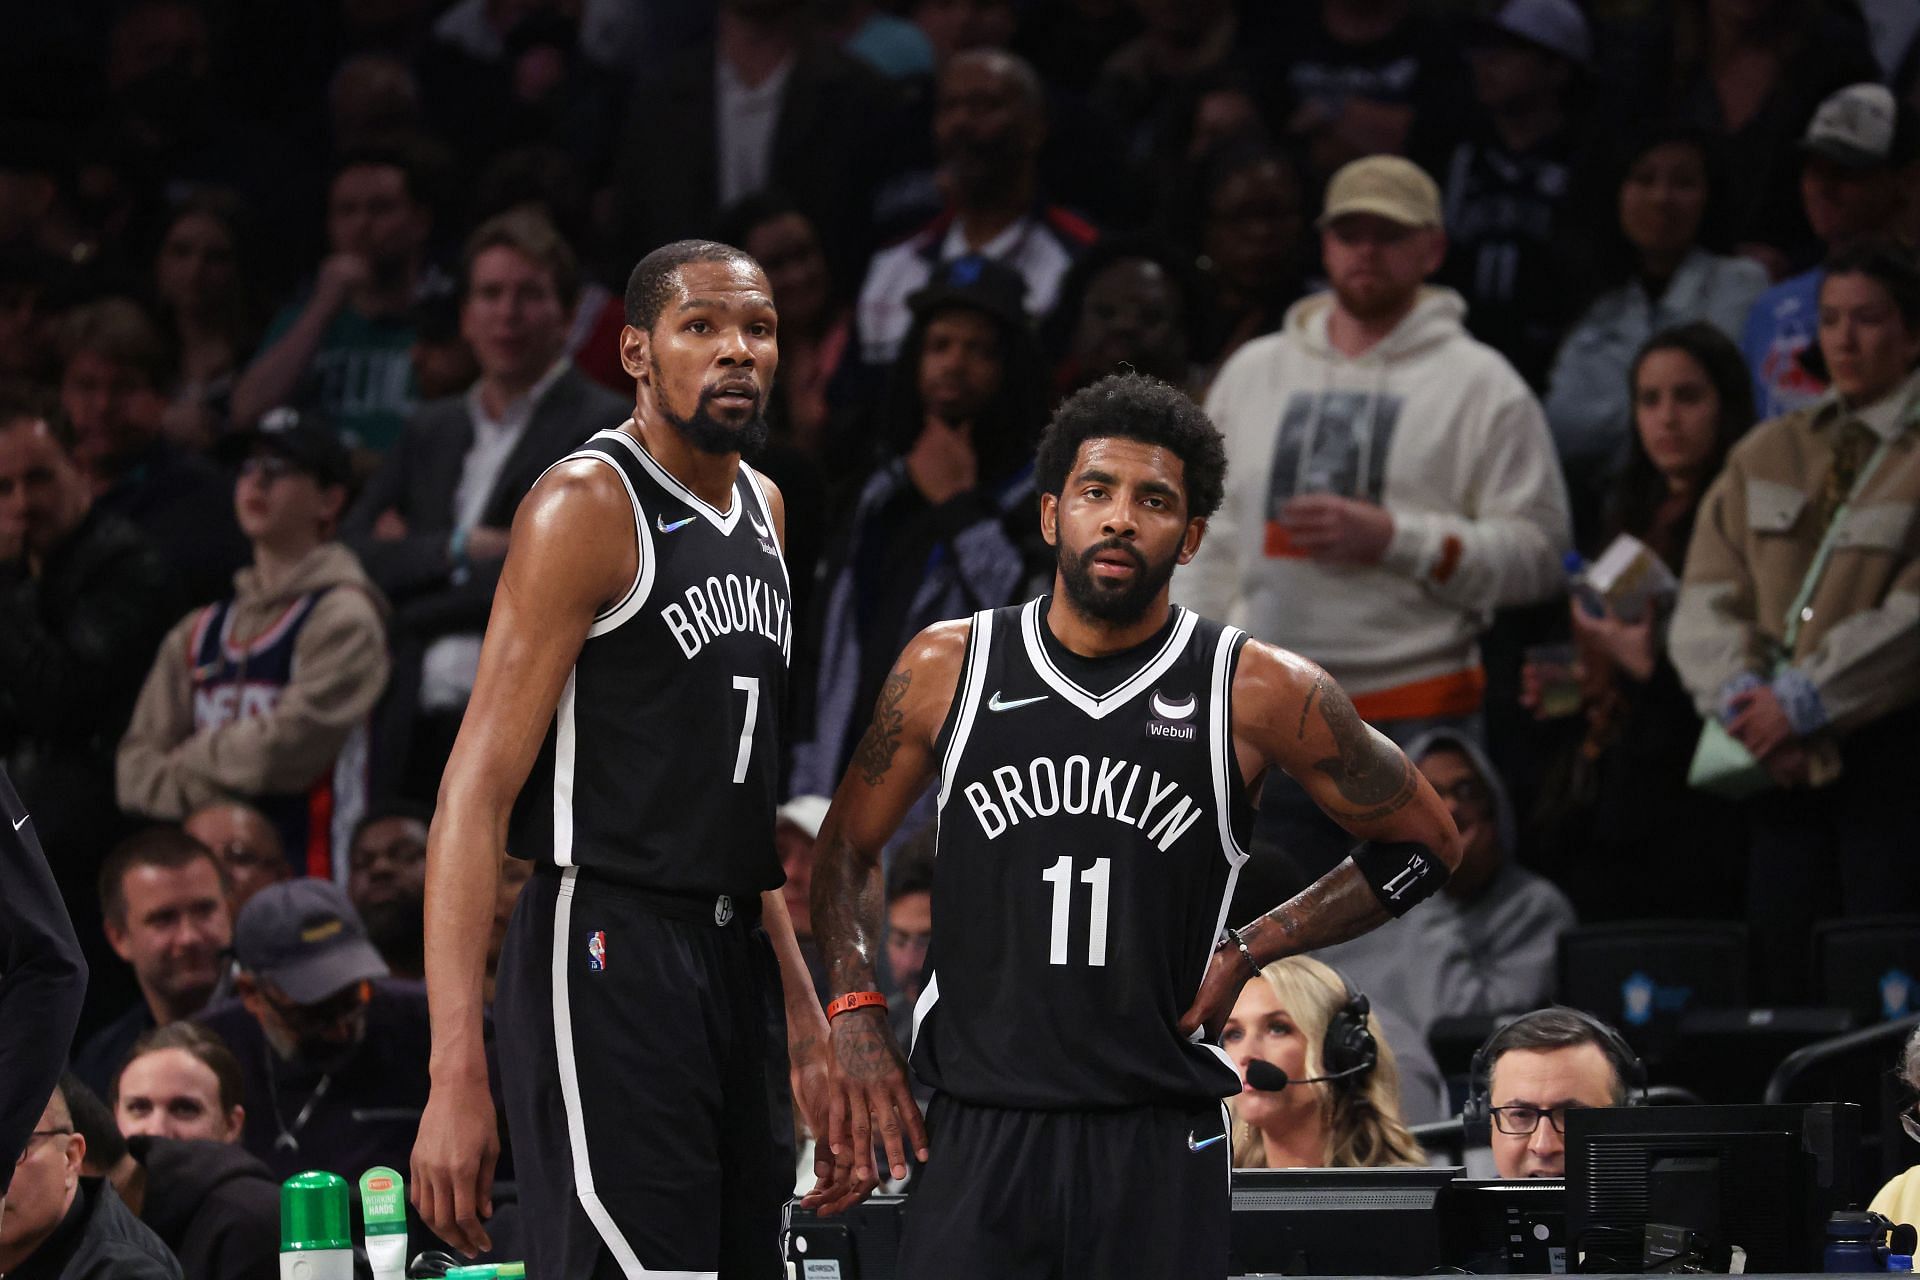 Brooklyn Nets superstars Kevin Durant and Kyrie Irving